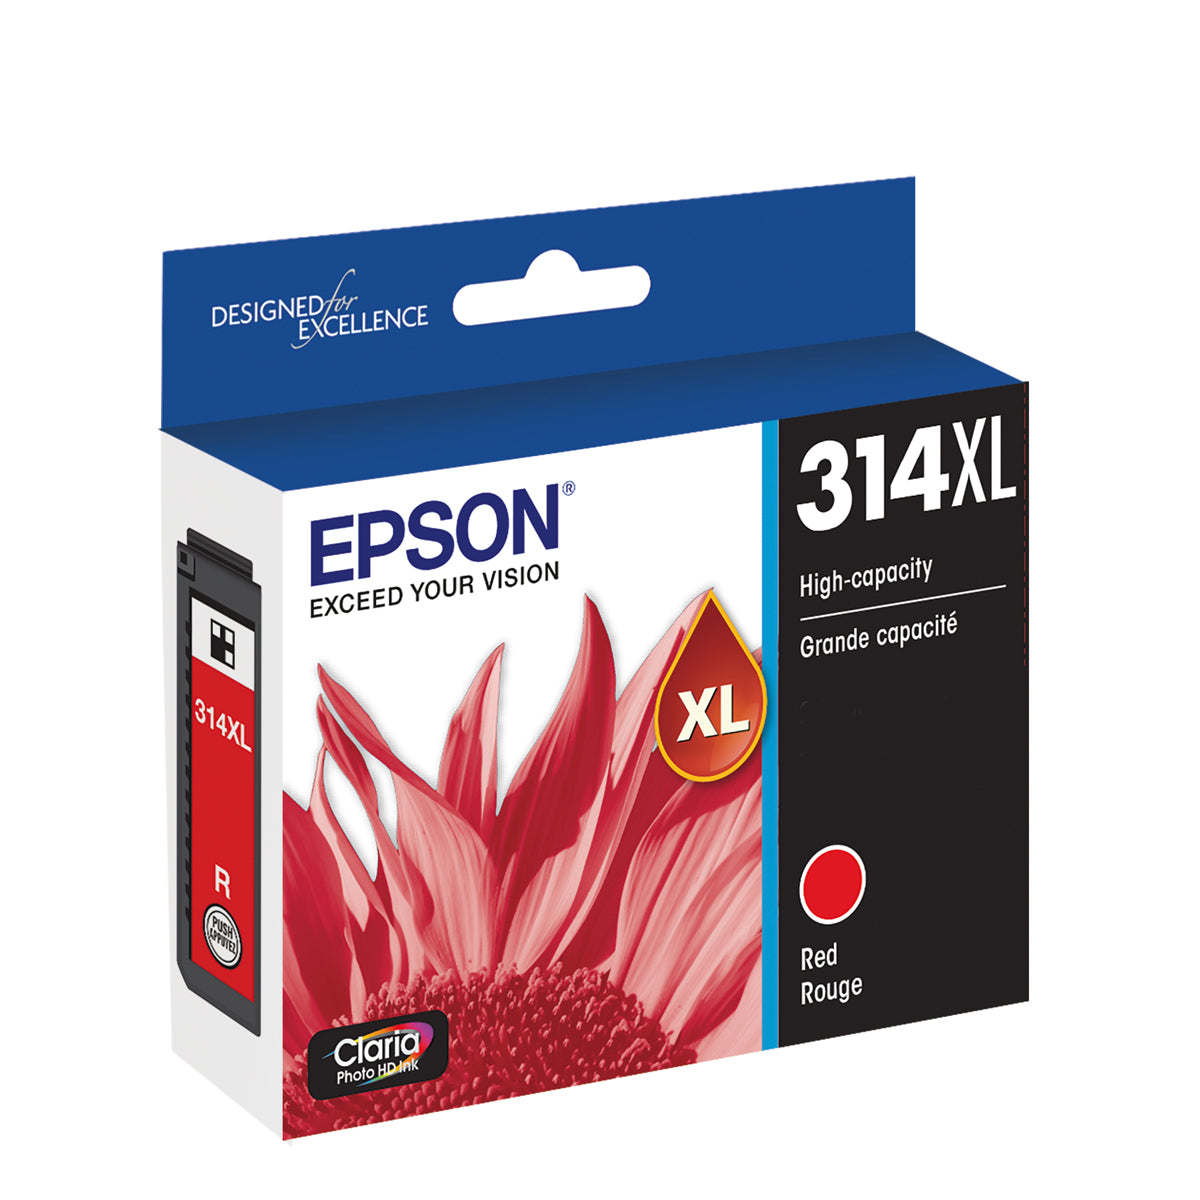 Epson T314XL720 Red Ink Cartridge for XP-15000 (314XL)